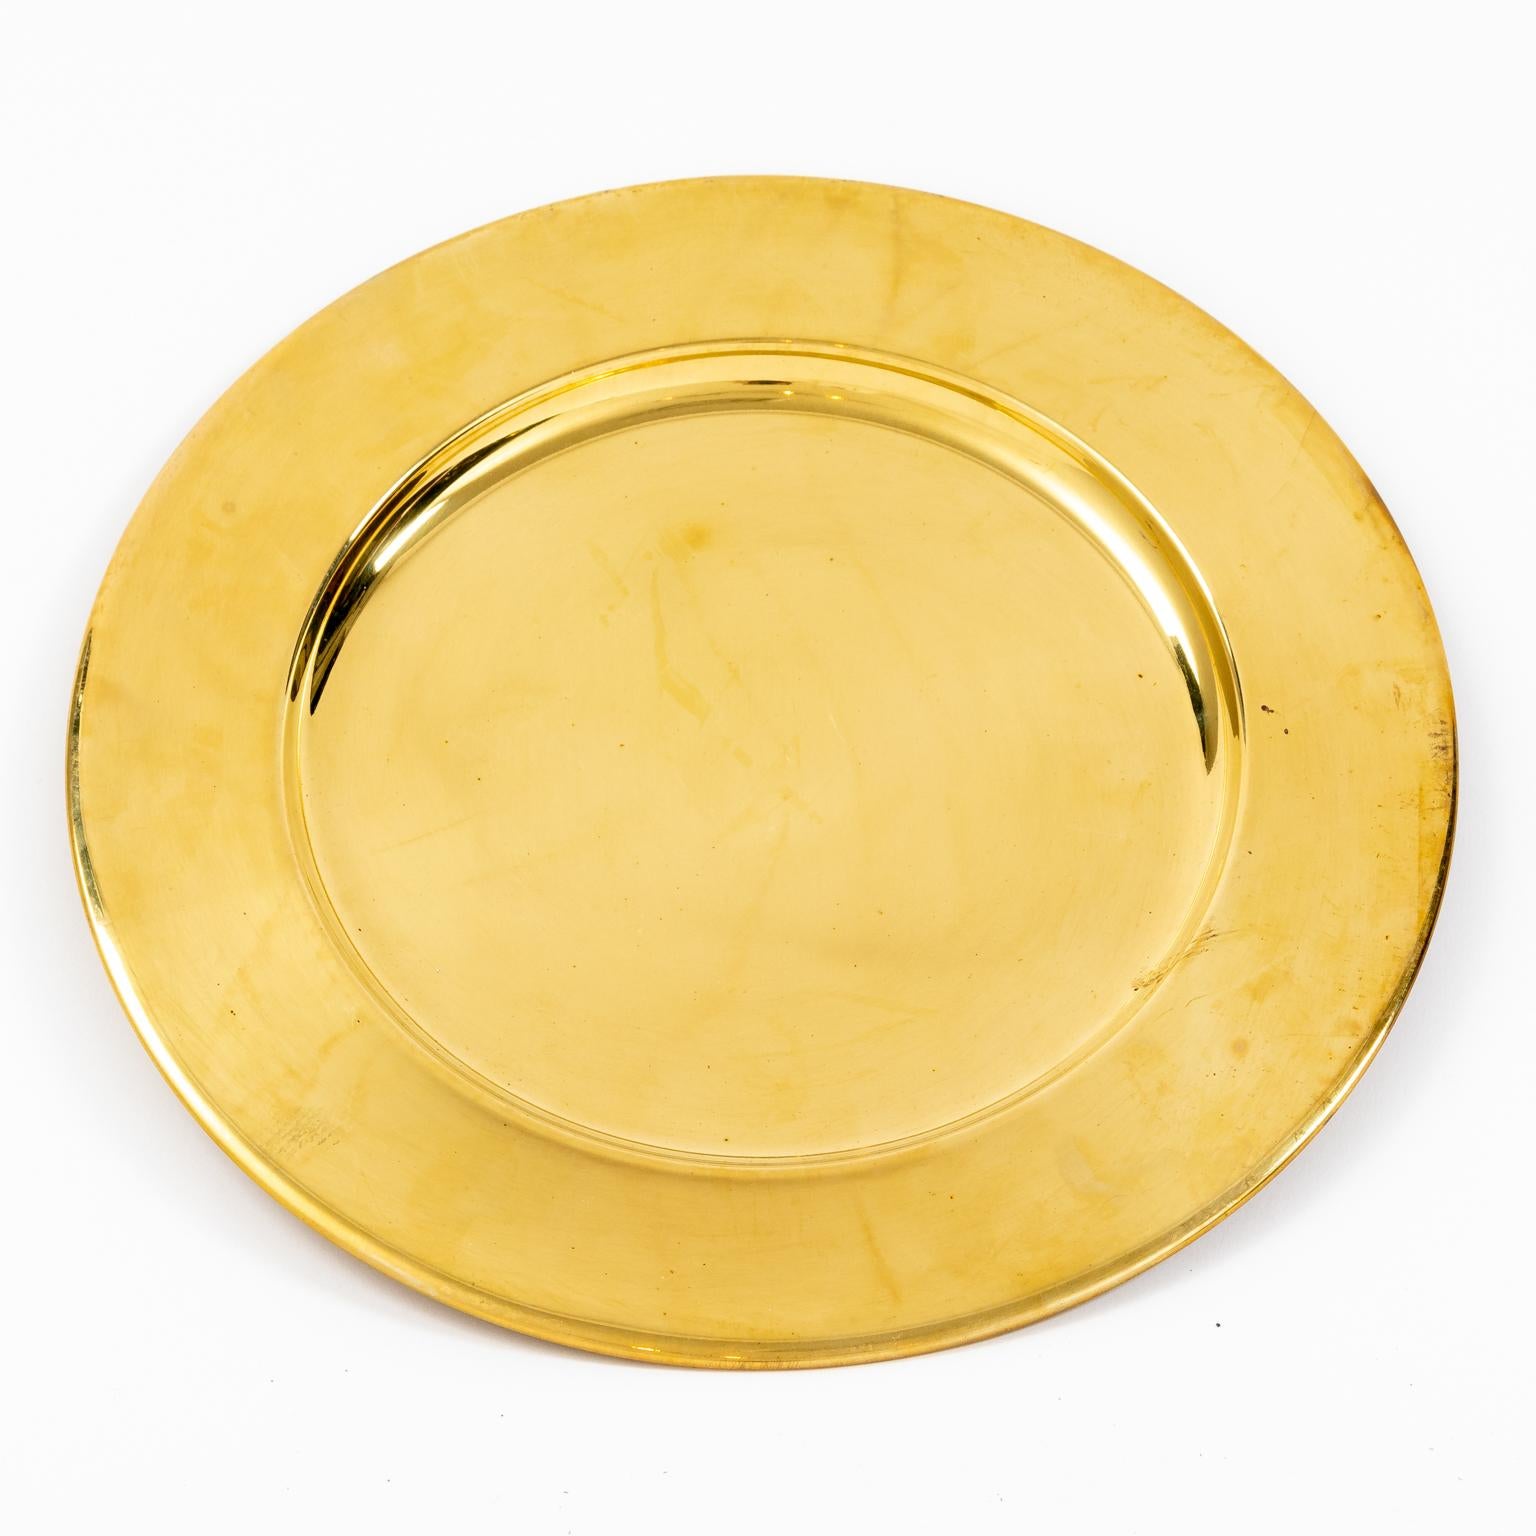 Set of twelve vintage 12.00 inch brass charger plates, circa mid-20th century. The brass is bright and shiny with light handling, these appear to have never been used. Please note of wear consistent with age including minor wear, slight scratches,